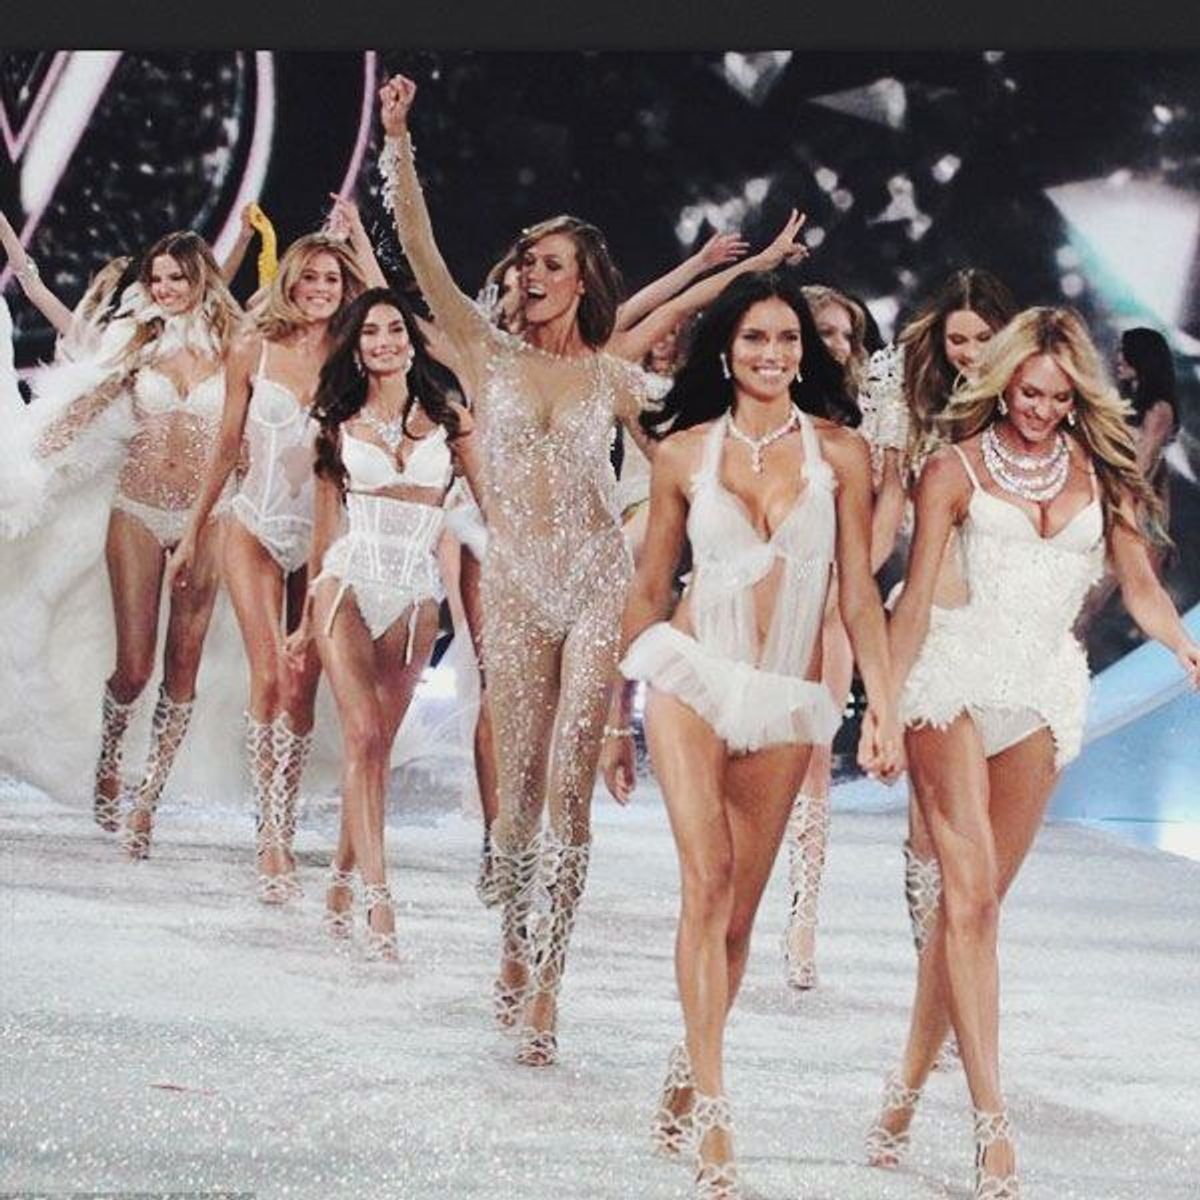 5 Reasons Not To Body Shame After The Victoria Secret (VS) Fashion Show